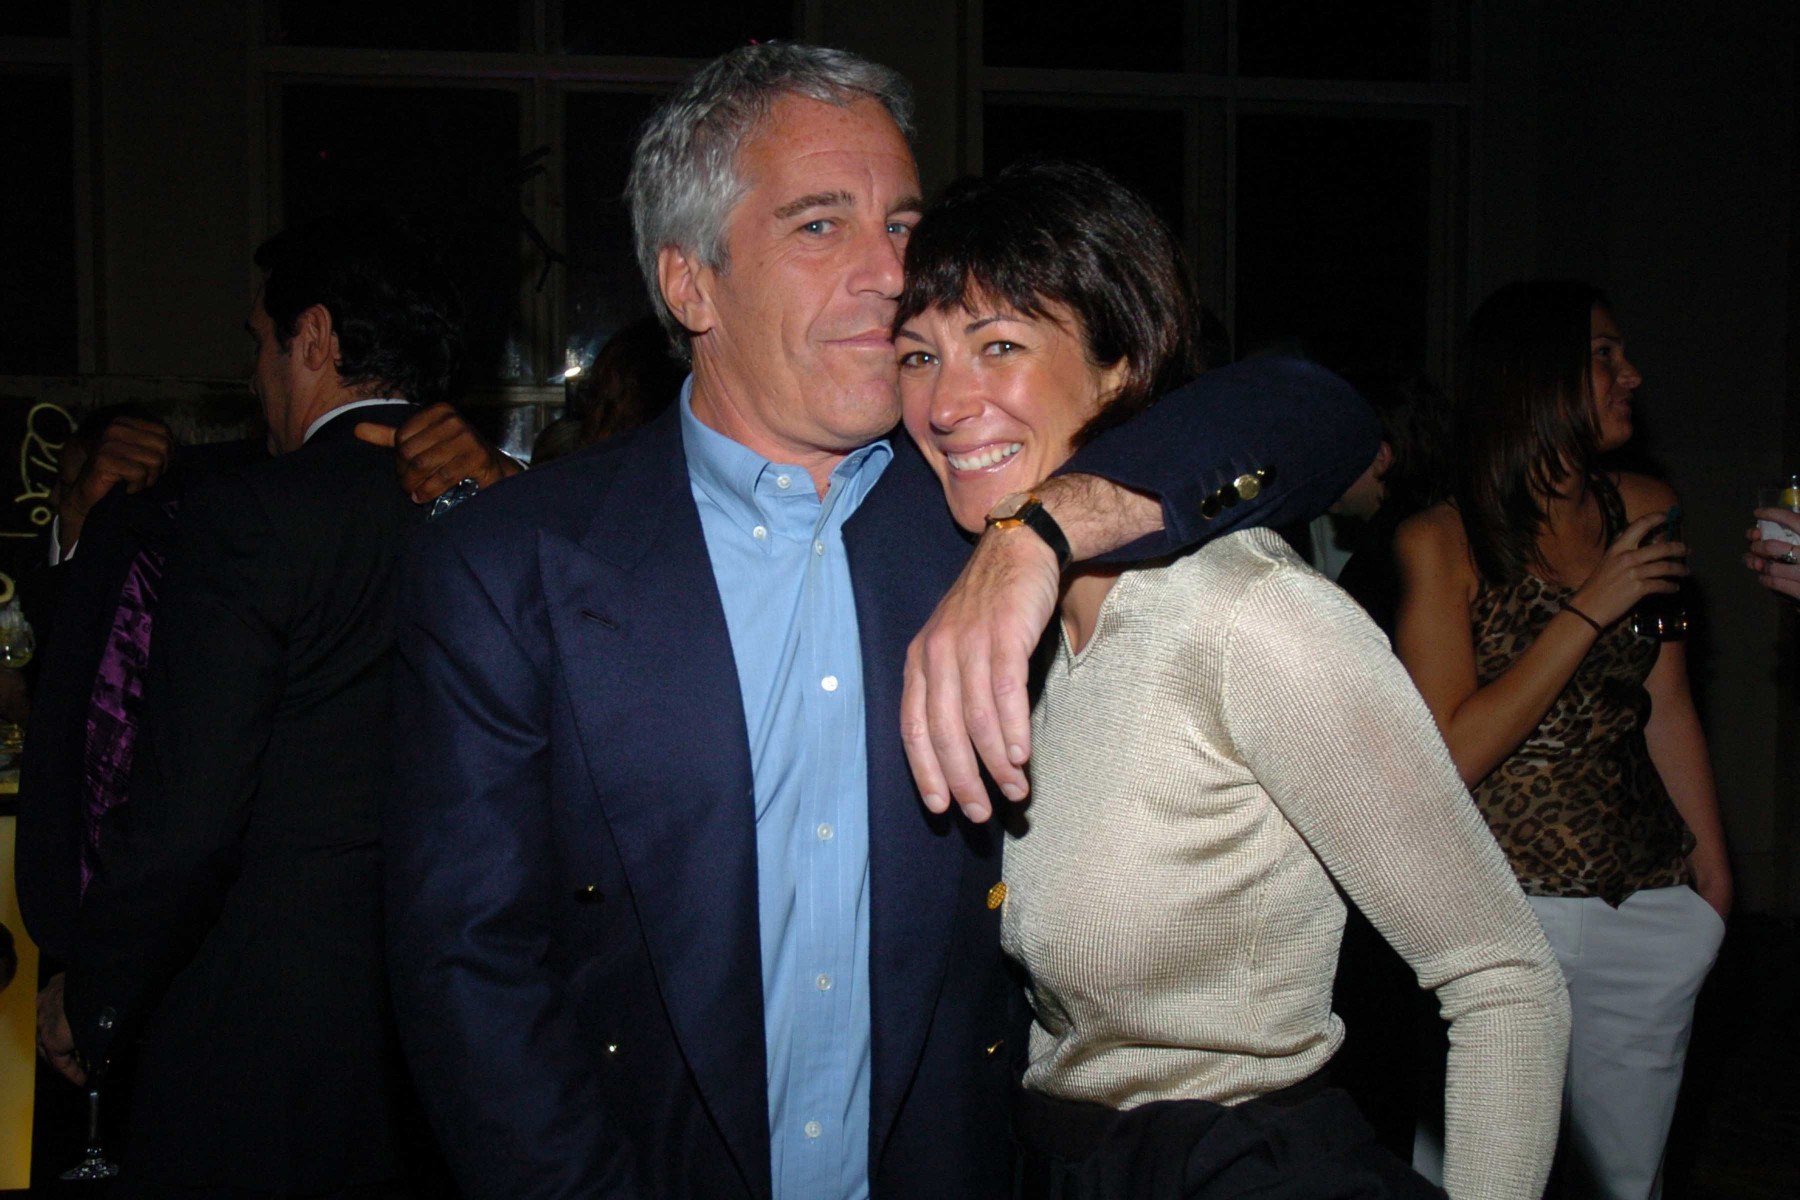 Twisted Epstein pictured with his former partner Ghislaine Maxwell